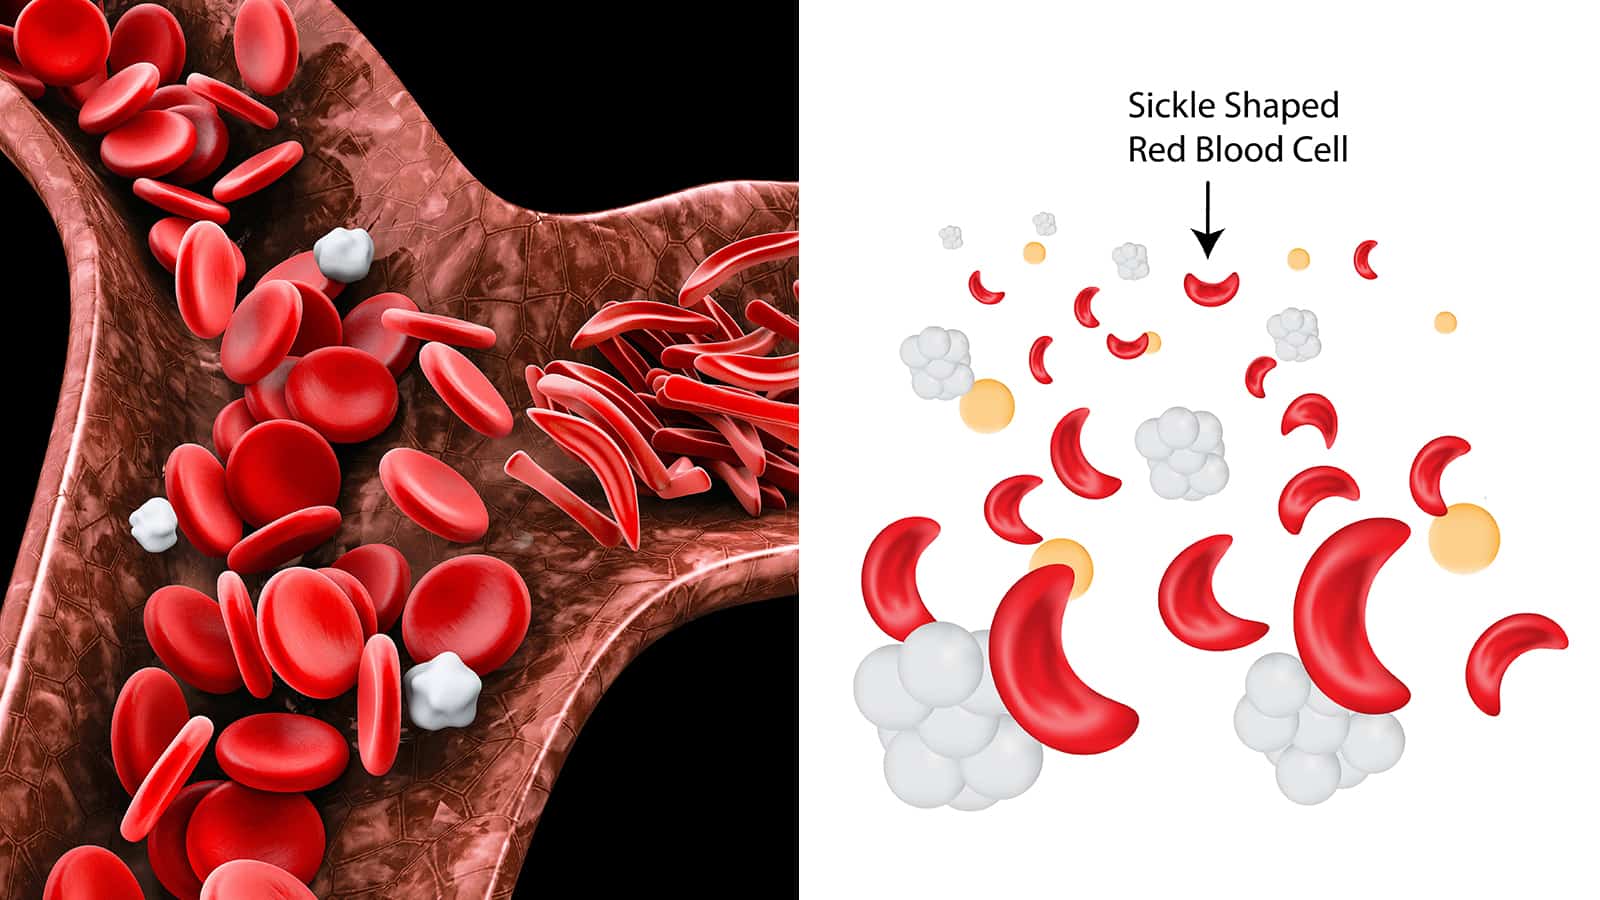 Boston College Reveals New Remedy for Sickle Cell Anemia